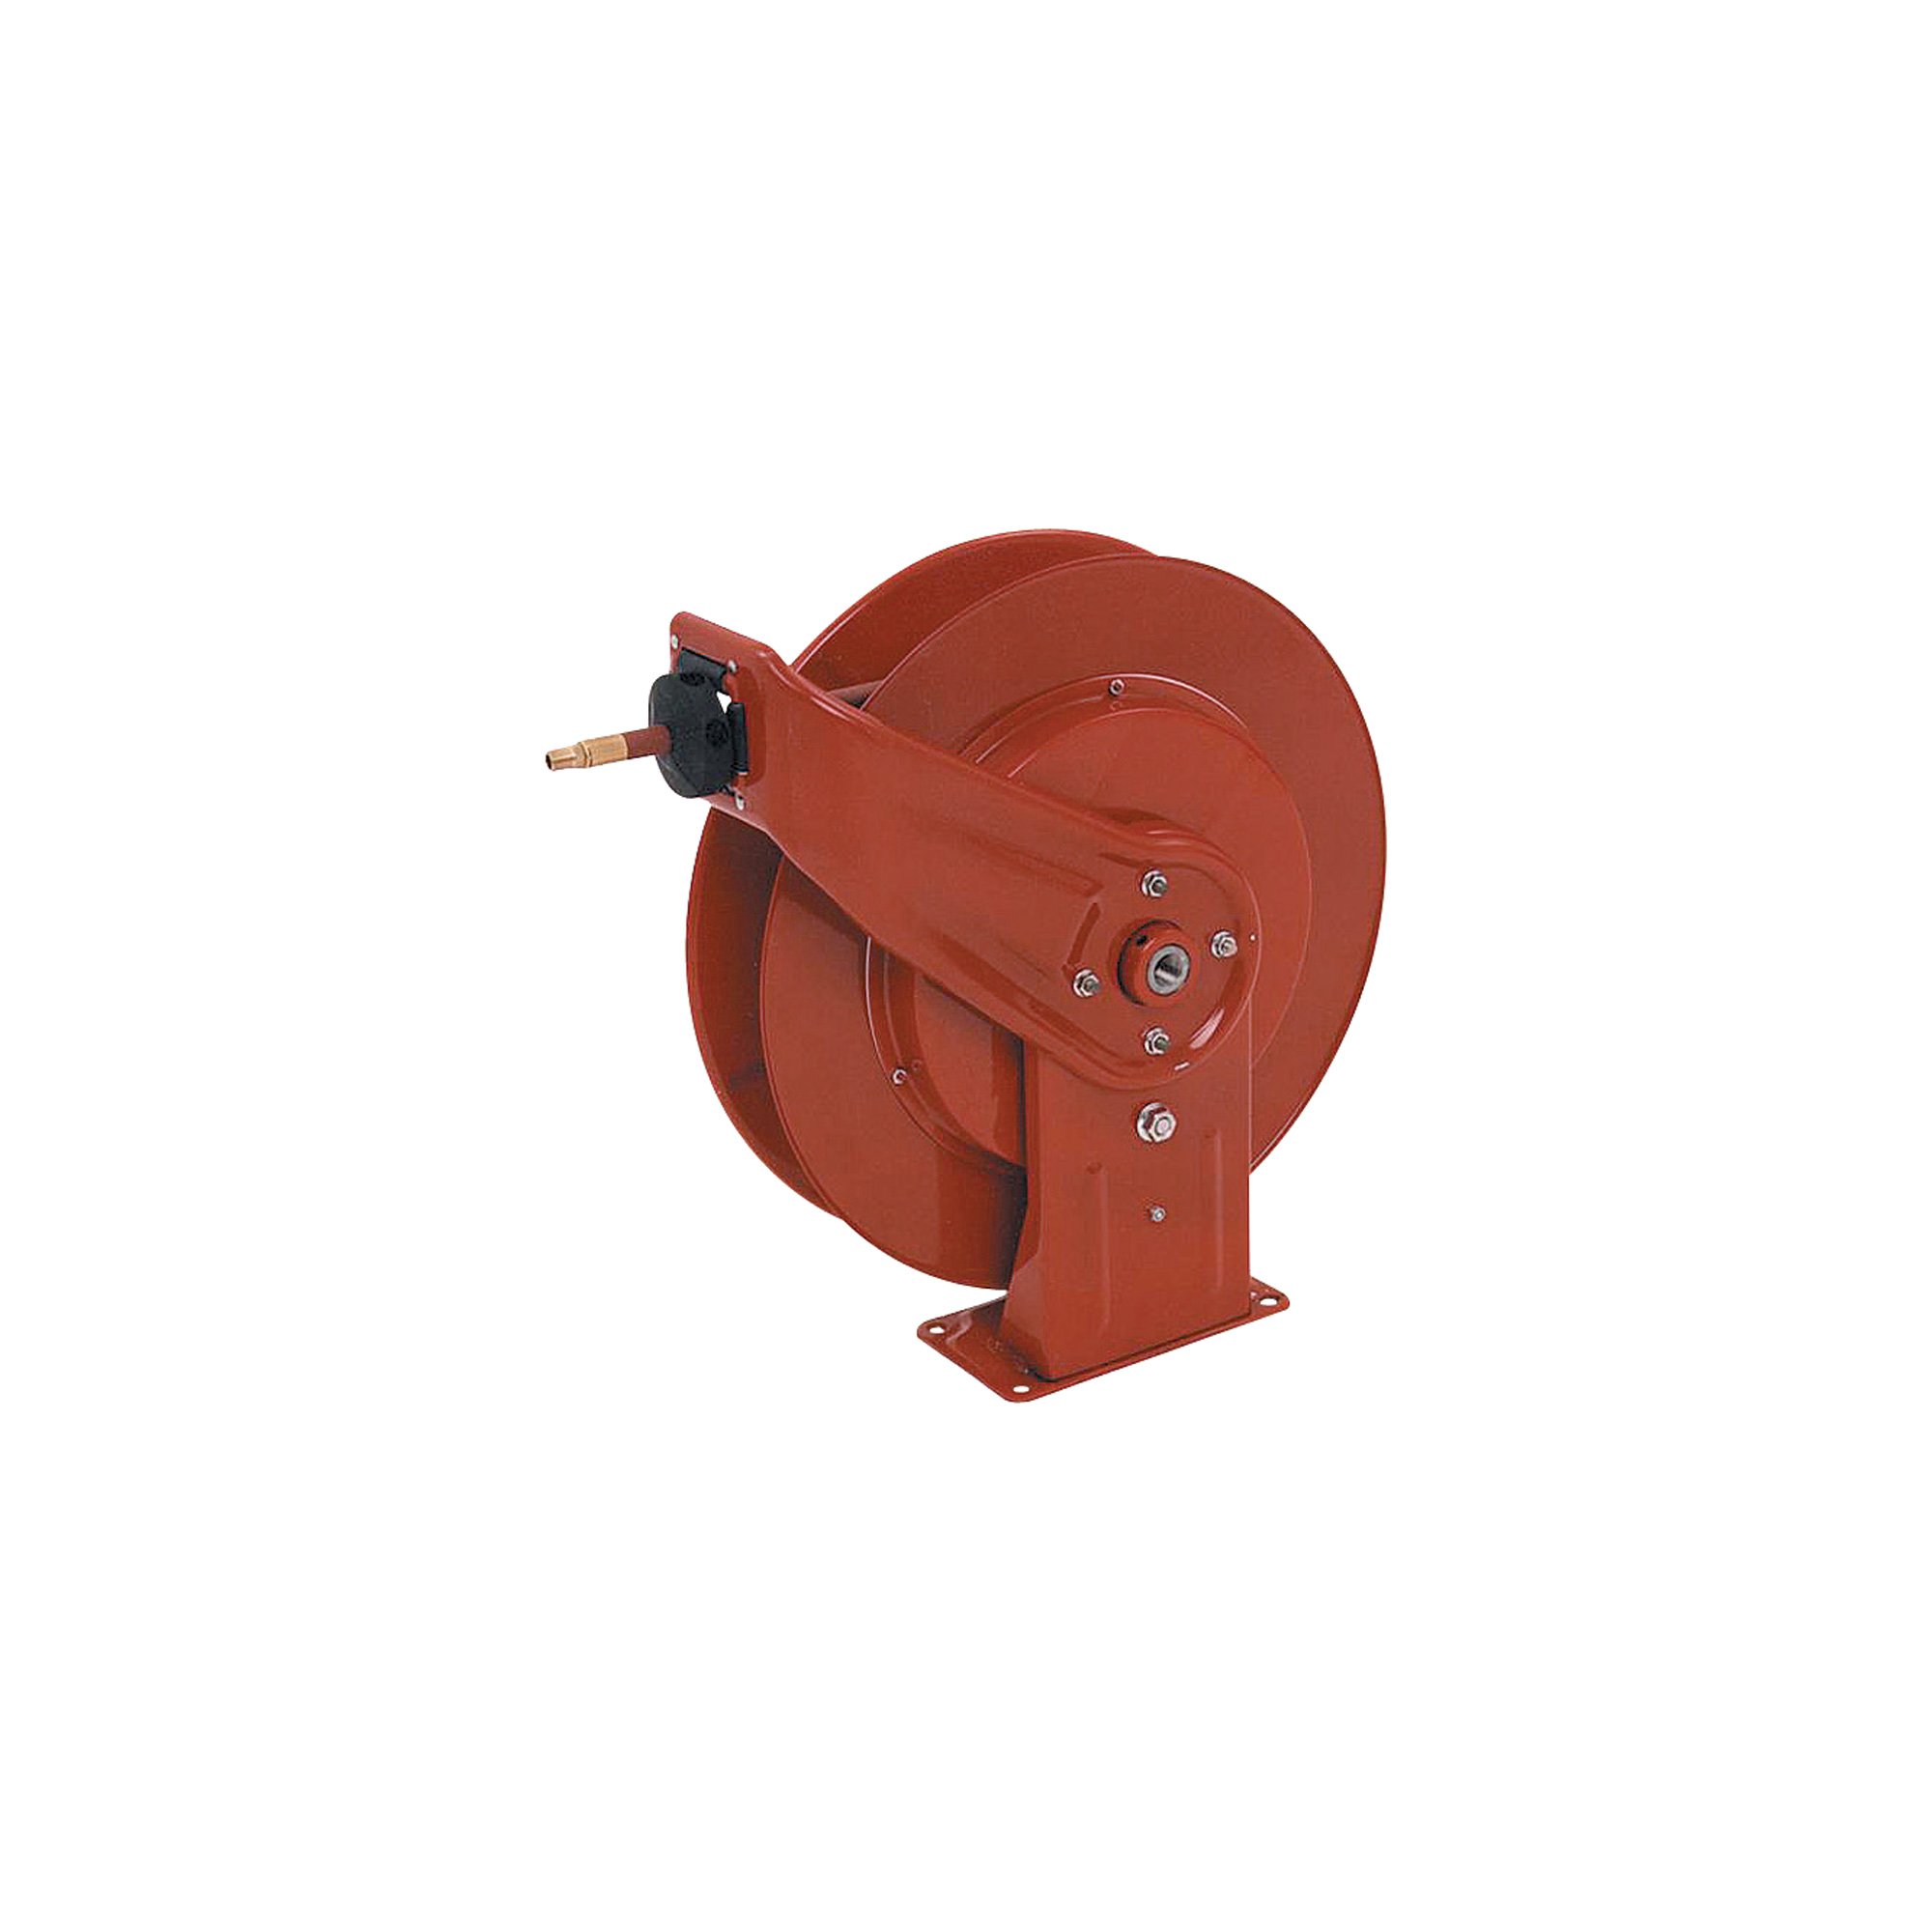 Reelcraft Air Hose Reel With Hose — 3/8in. x 75ft. Hose, Max. 300 PSI